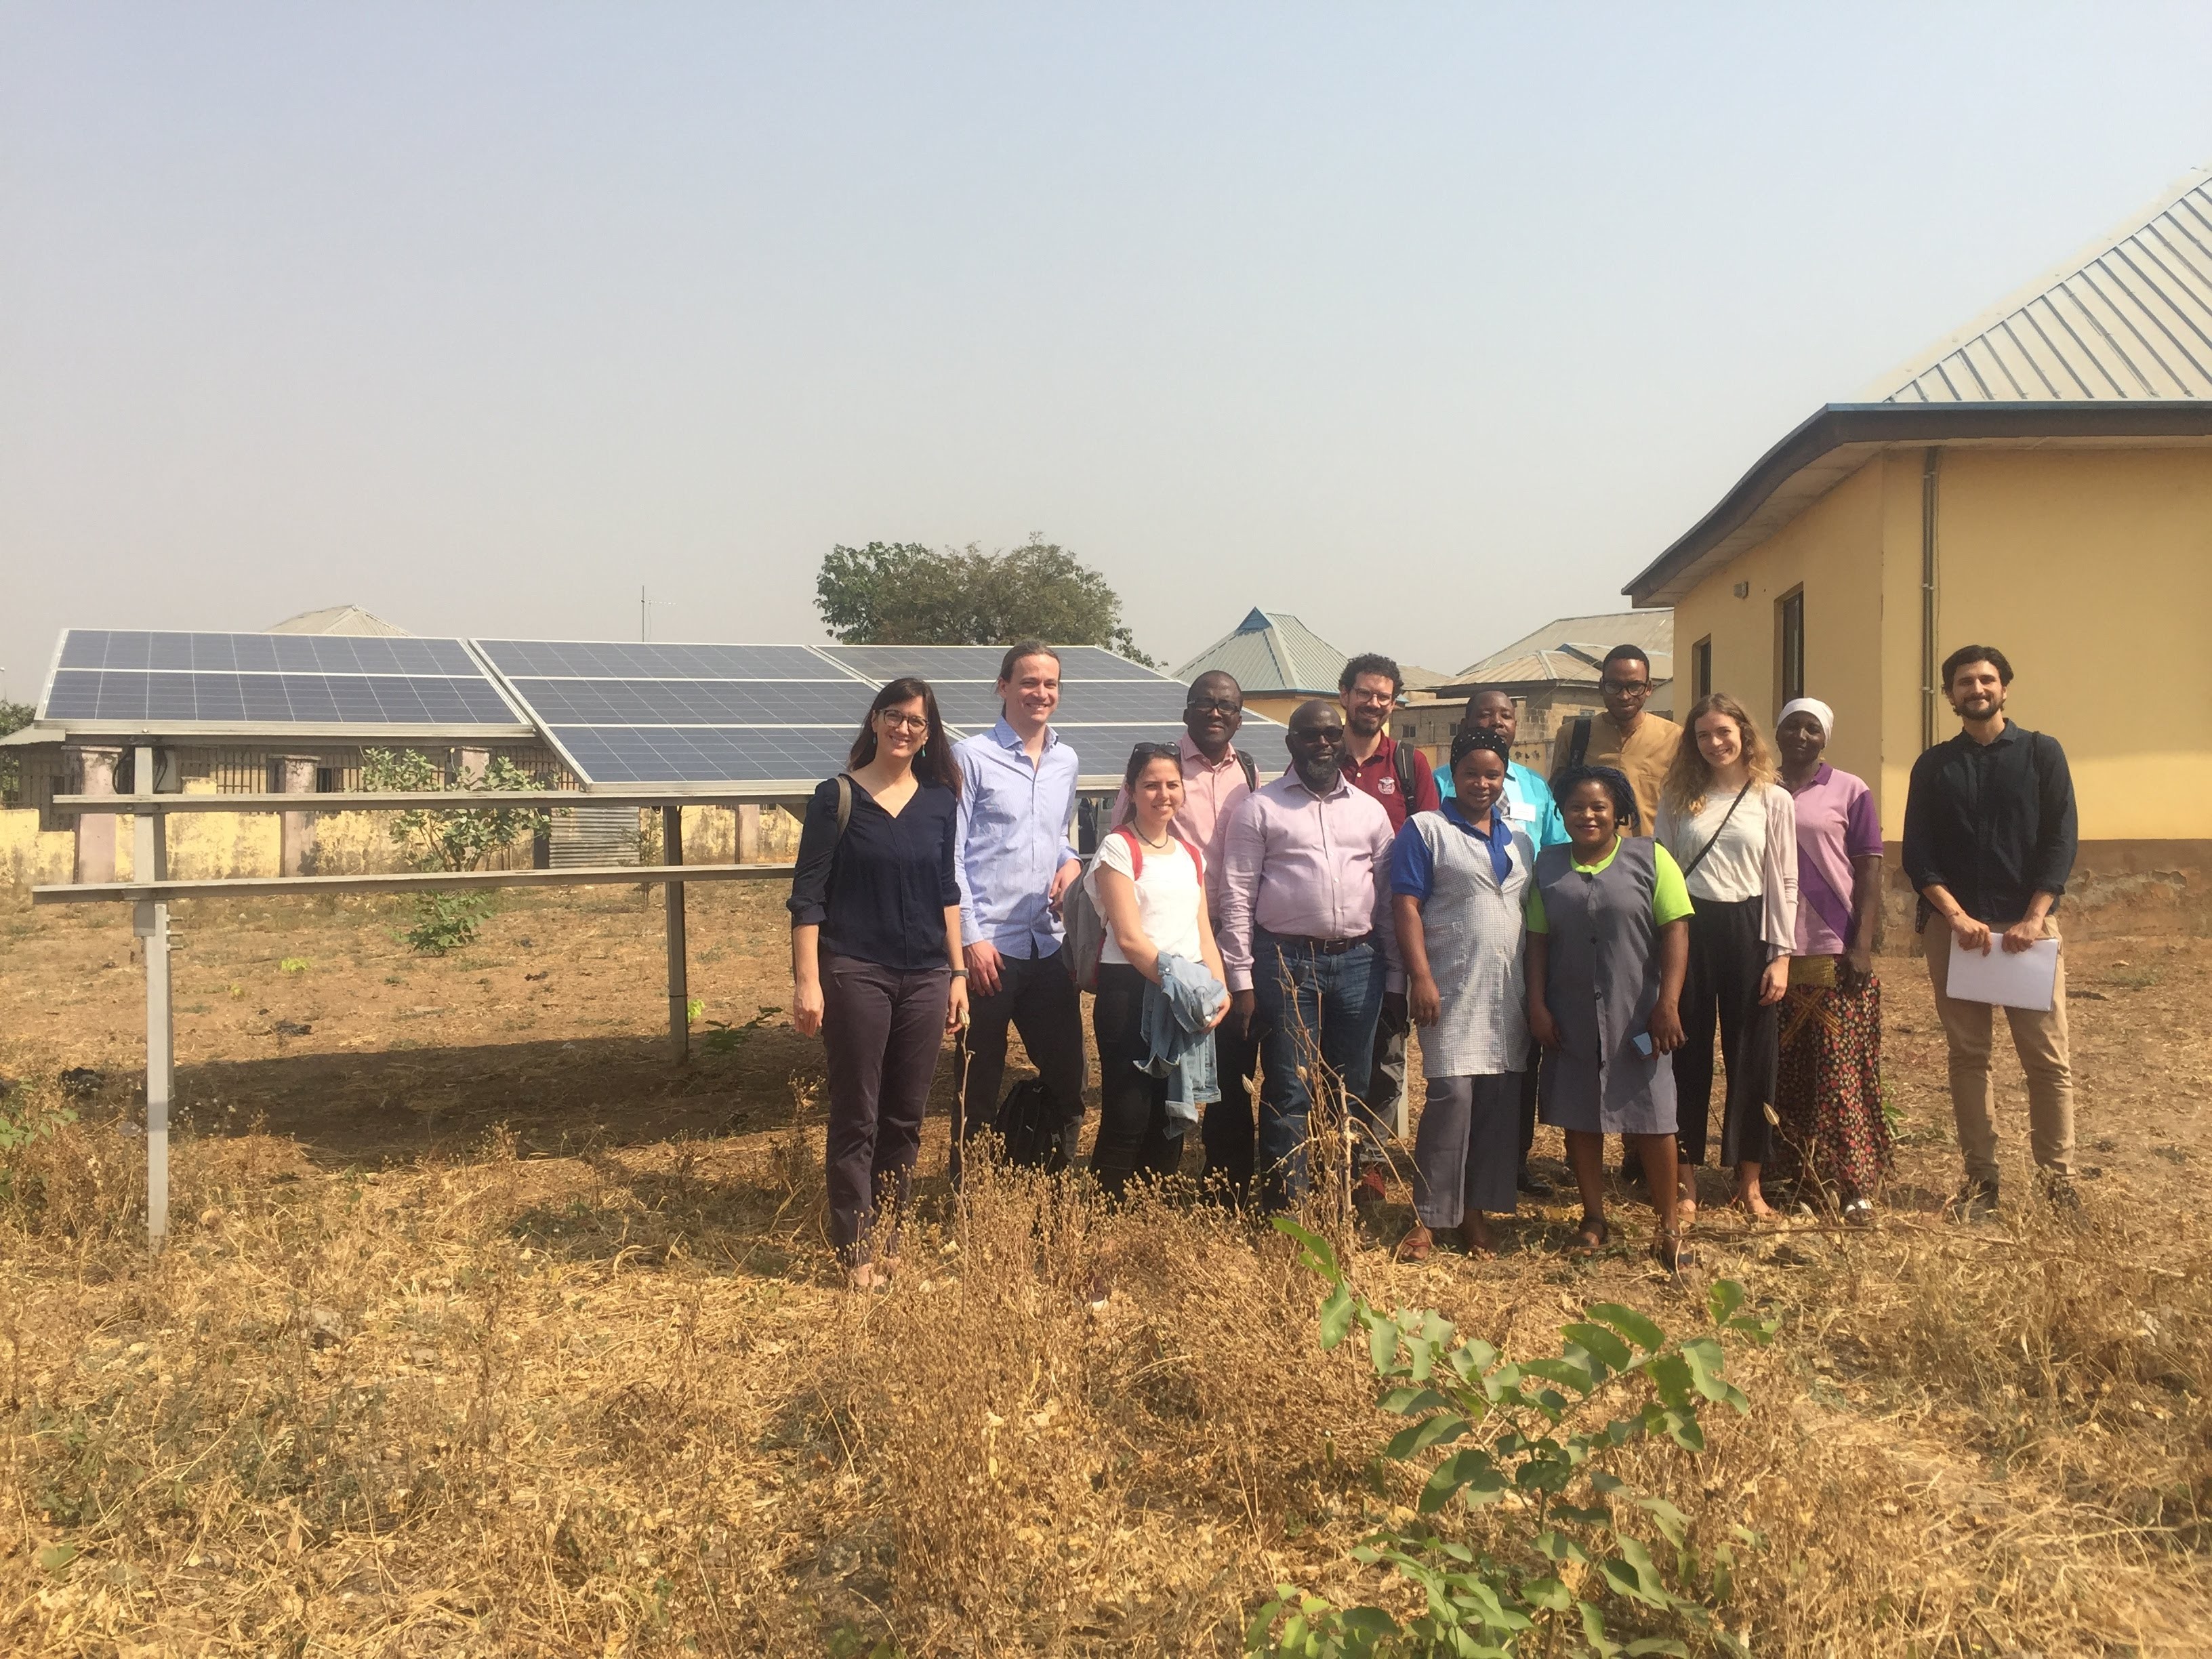 The PeopleSuN project team in front of a solar installation at the Dakwa PHC health center in March 2019. © Reiner Lemoine Institut gGmbH